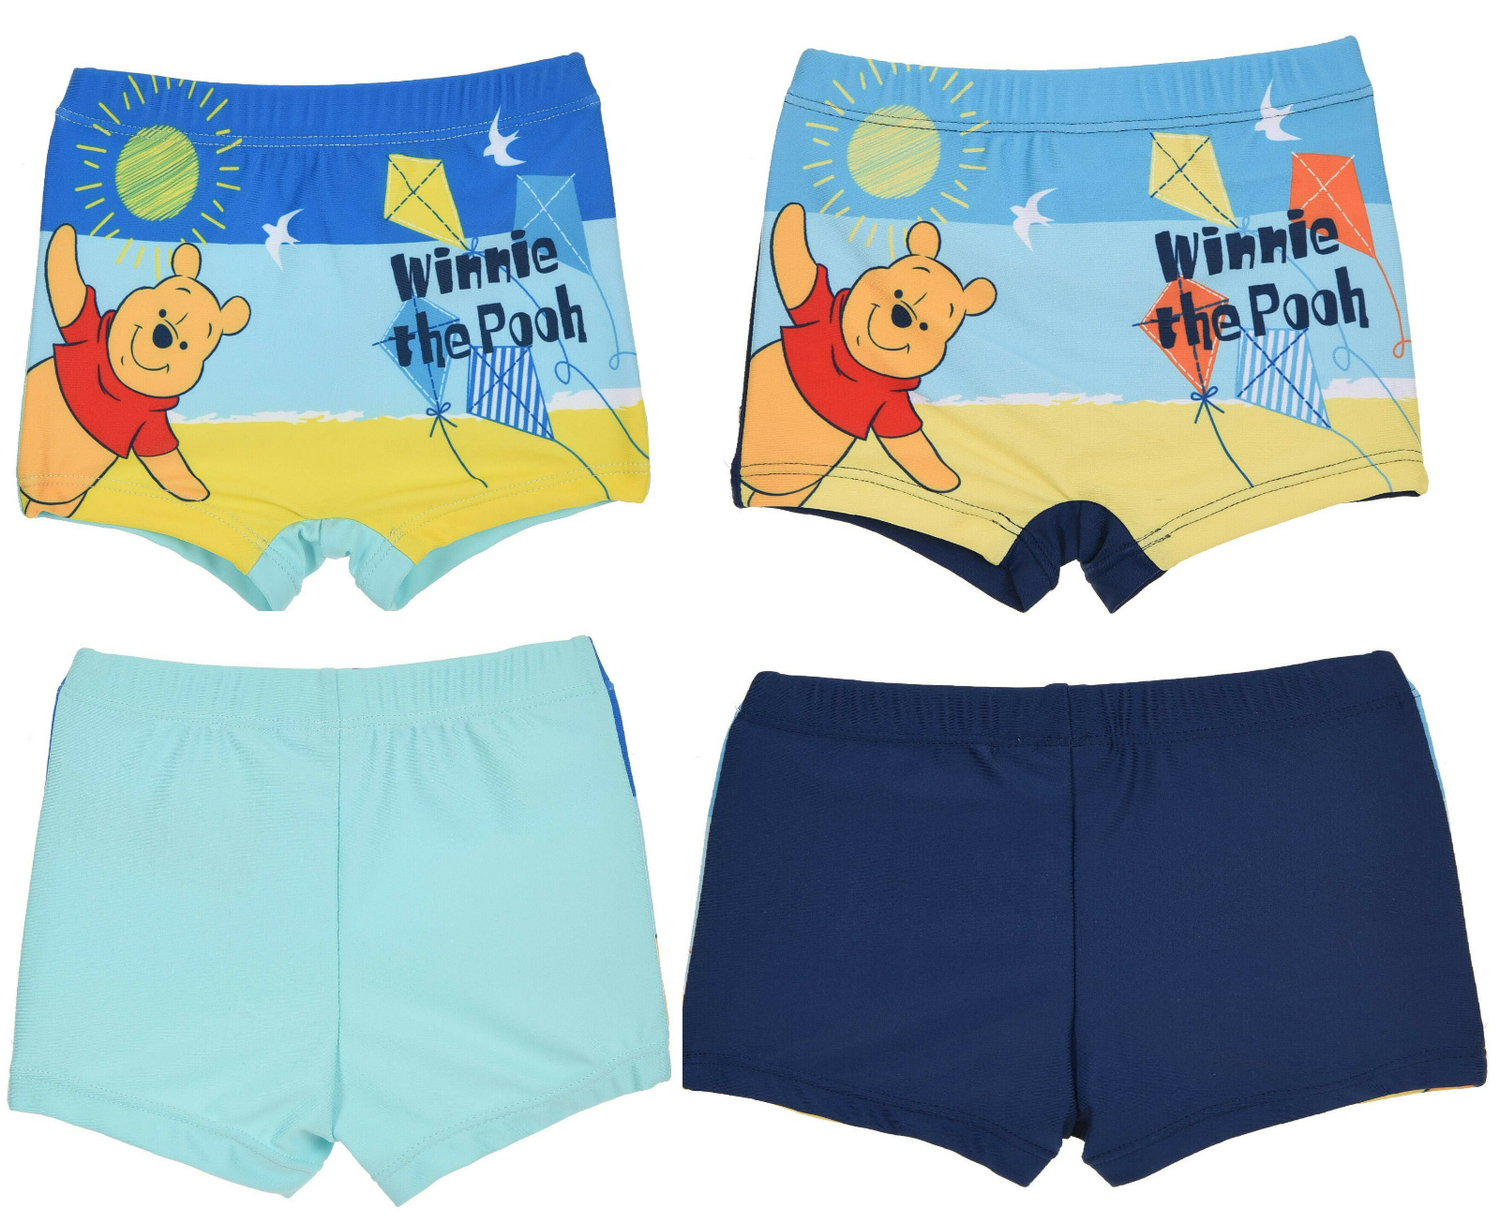 Boys Winnie The Pooh Swimming Trunks. These Have A Cute Winnie Pooh Design On The Front And Plain Colour On The Back. Available In Sizes 12 Months, 18 Months, 24 Months, 36 Months. These Are An Official Disney Product.